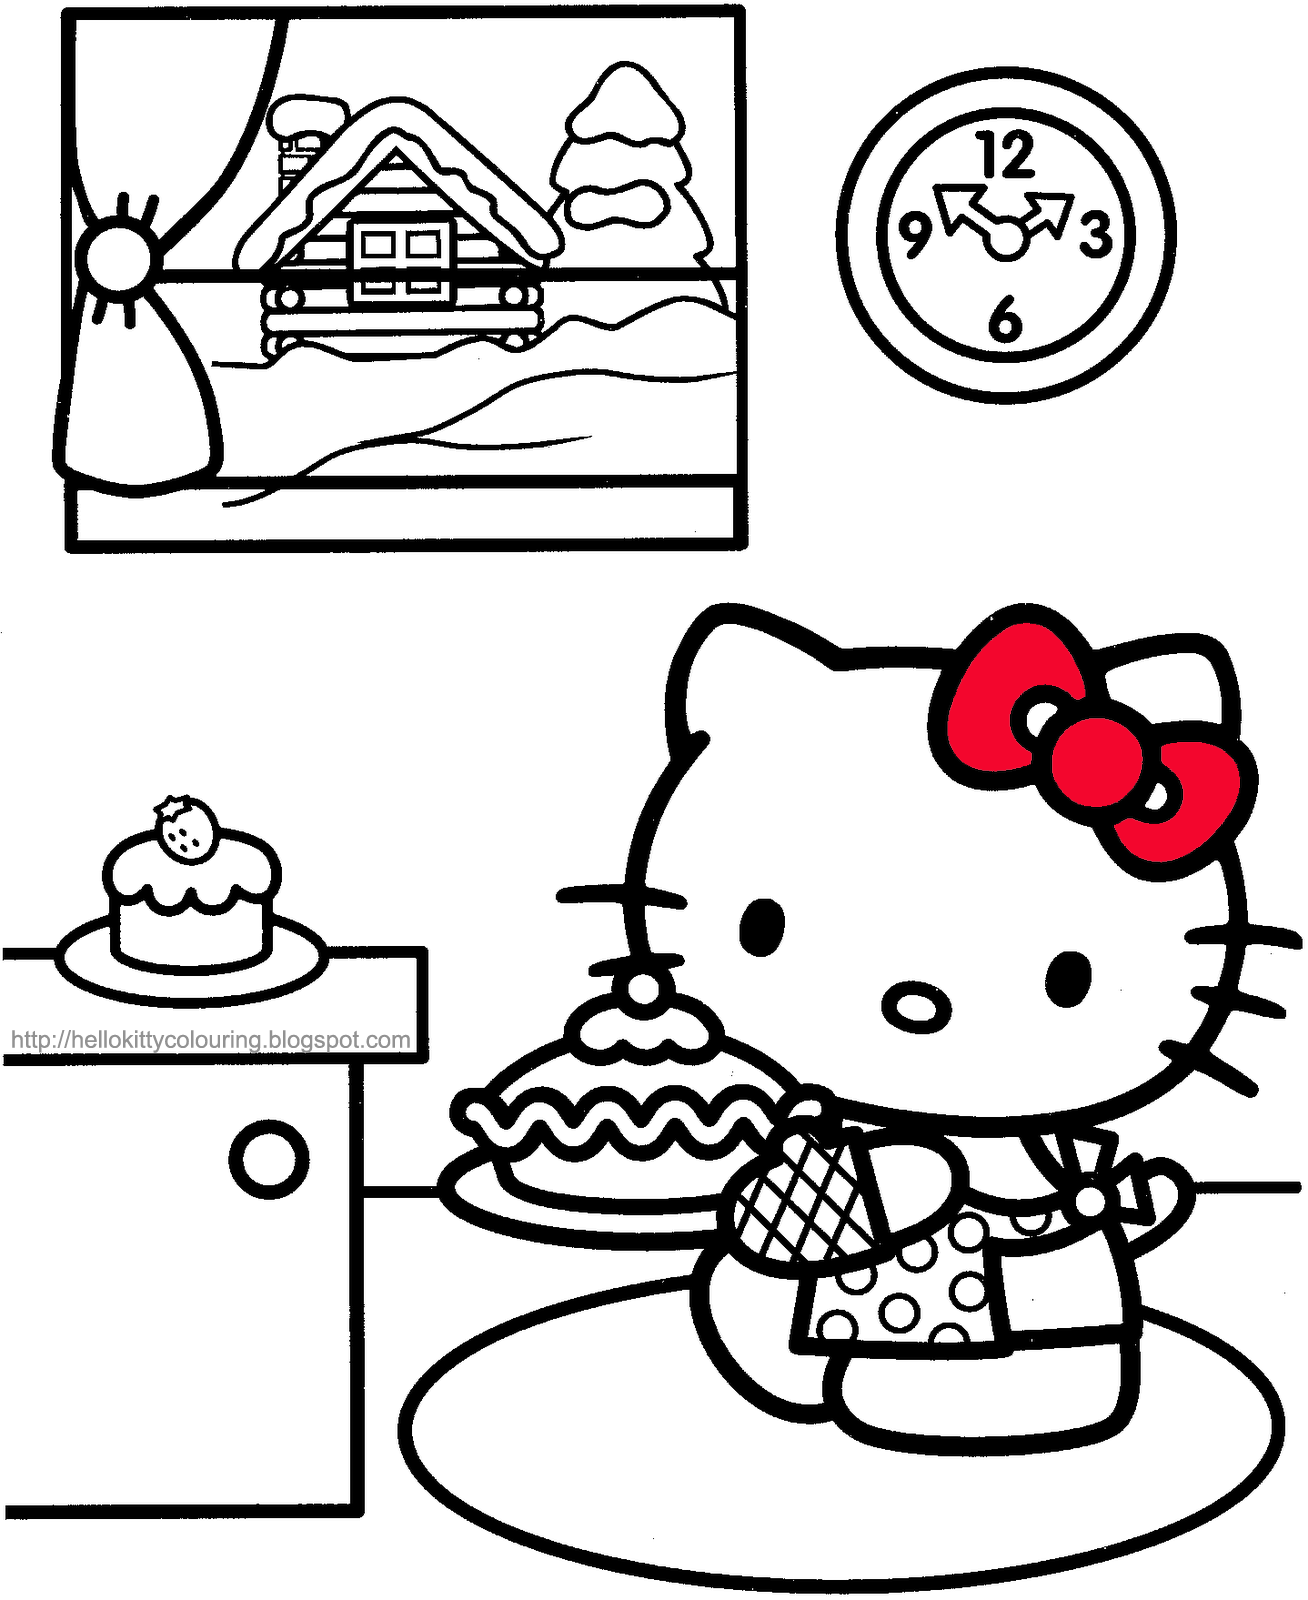 Printable hello kitty coloring pages are suitable for kids of all ages. Free Hello Kitty Cupcake Coloring Pages Download Free Hello Kitty Cupcake Coloring Pages Png Images Free Cliparts On Clipart Library